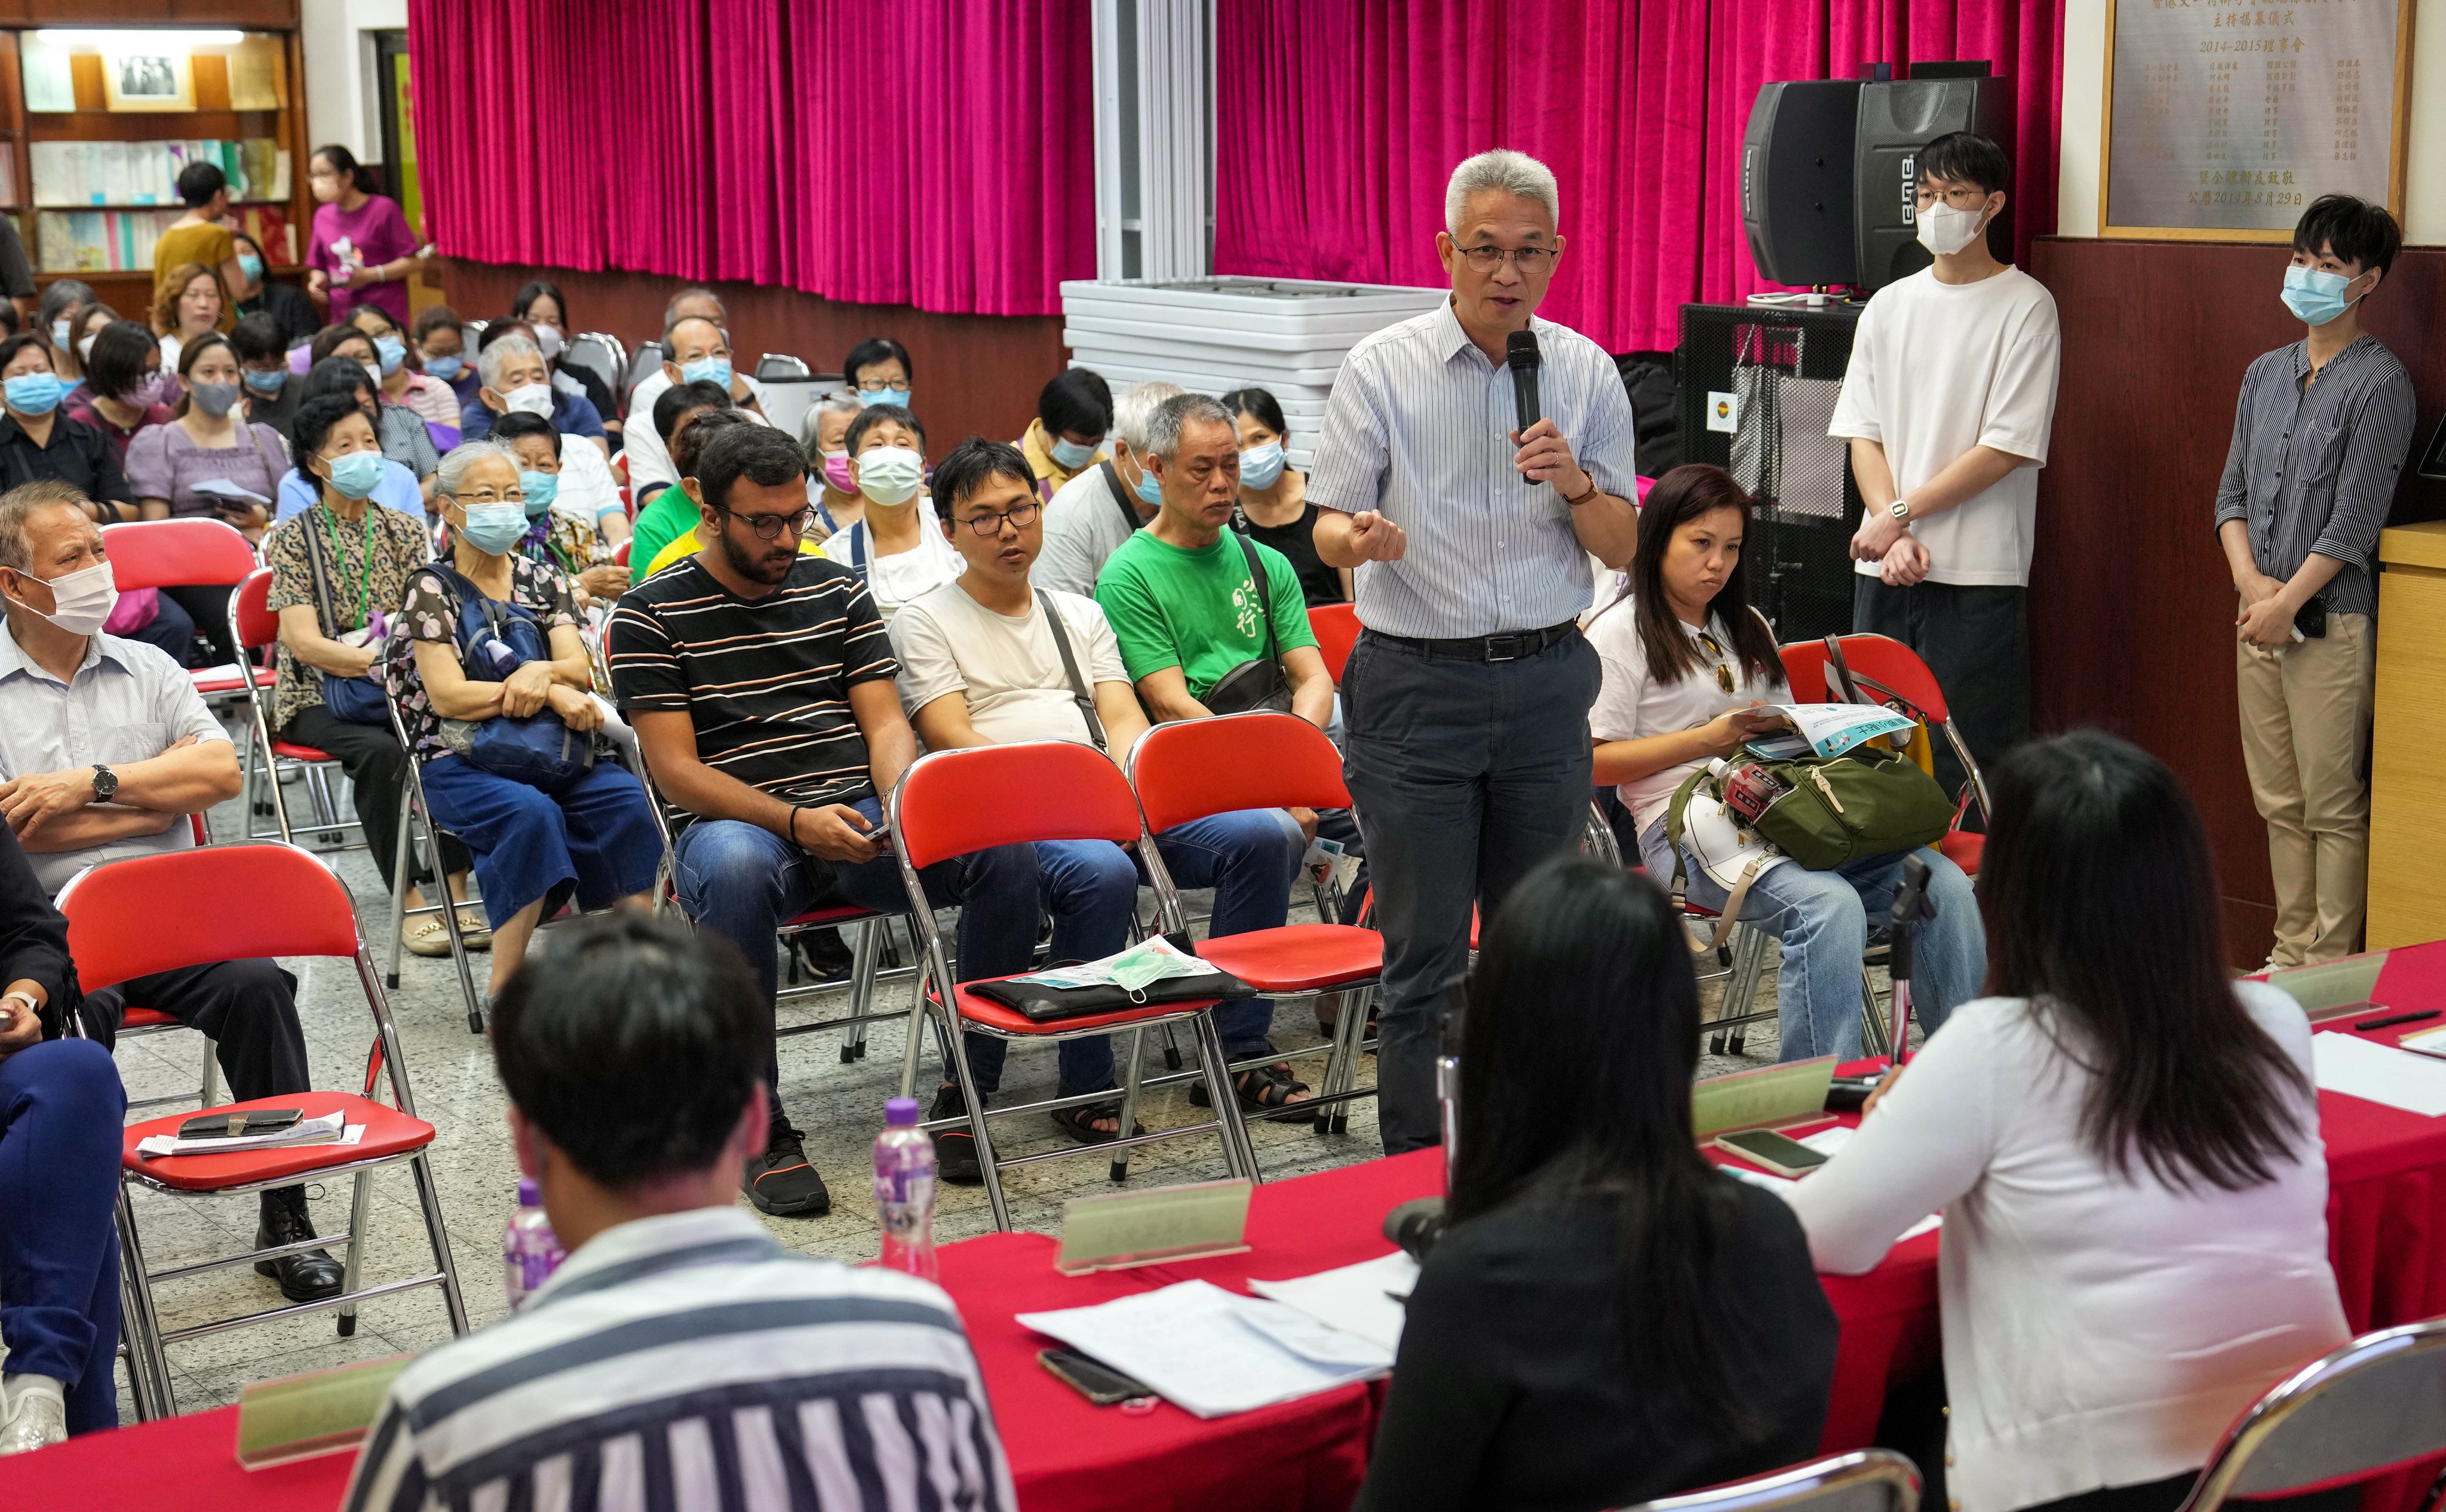 People attend a seminar organised by the district office on how to deal with negative emotions caused by social tragedies, at the Sham Shui Po Kaifong Welfare Advancement Association, on June 7. Photo: Elson Li